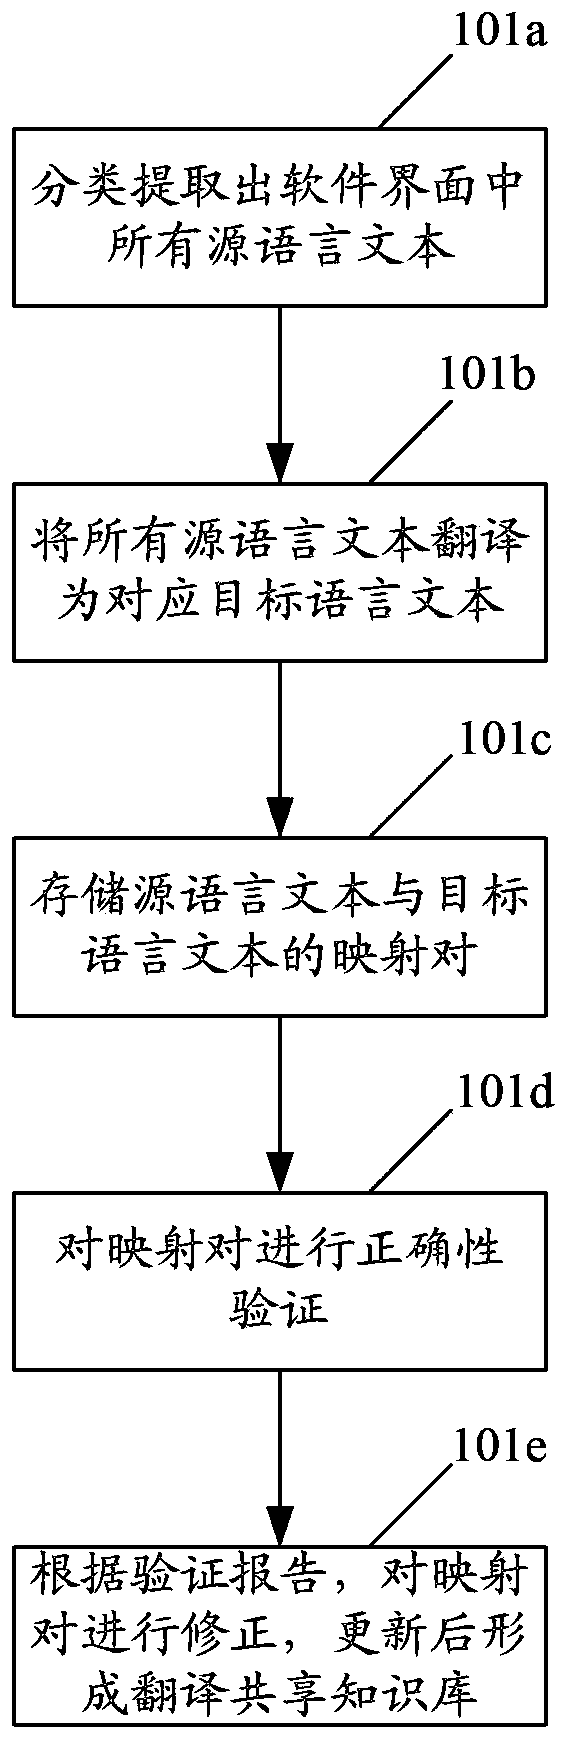 Test method and test system for translation problems in software localization testing